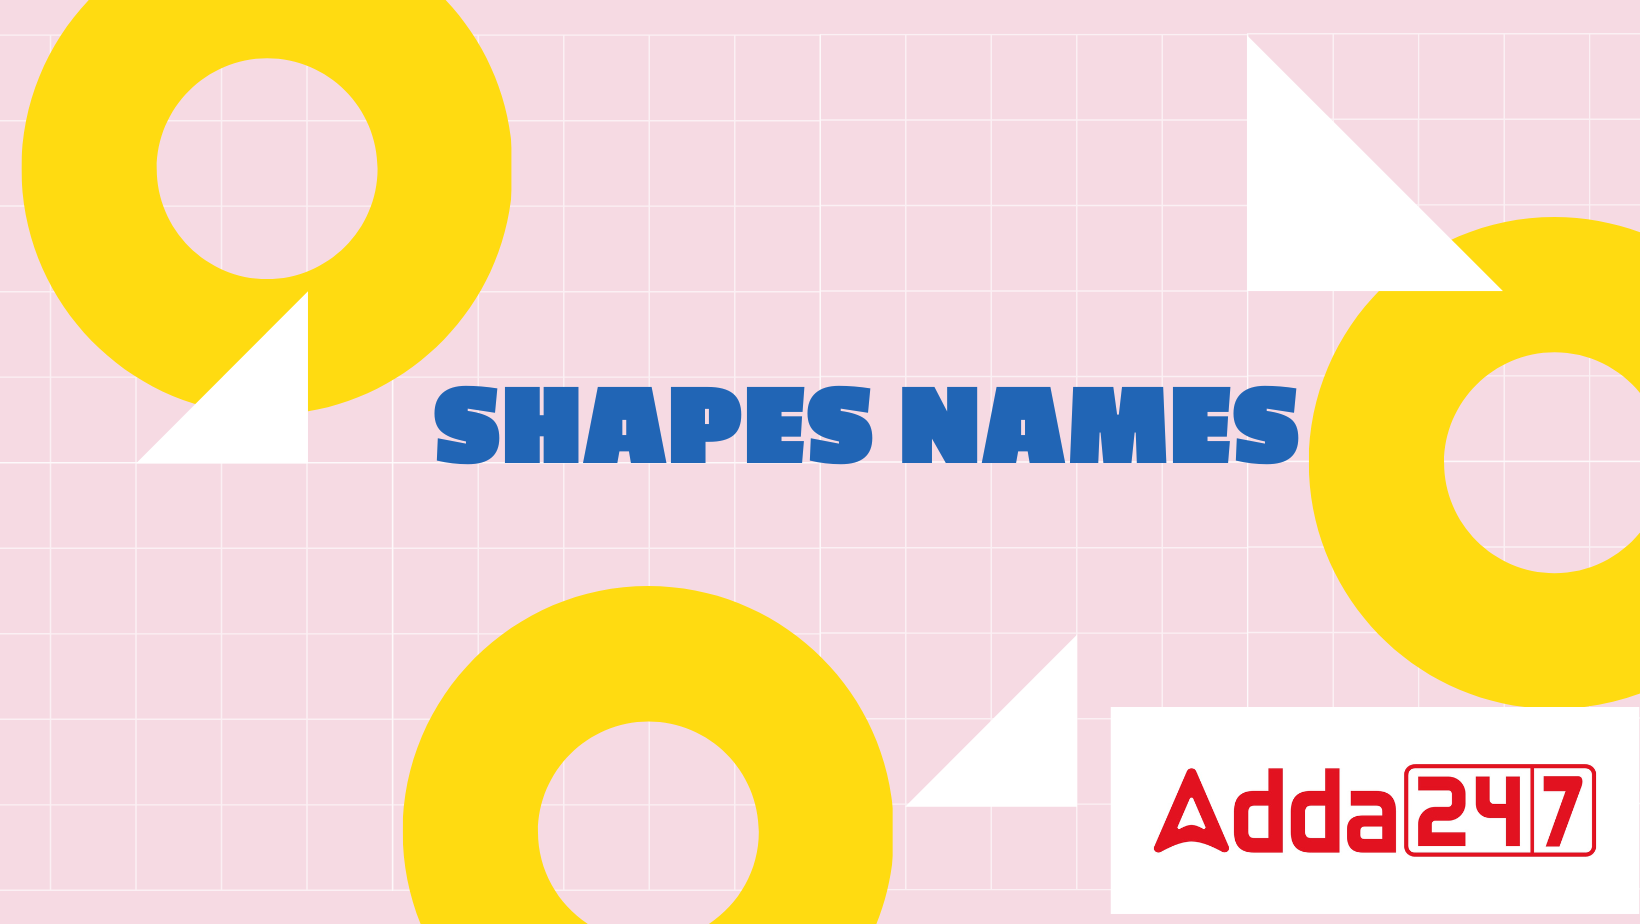 All Shapes Name, 2D, 3D in Maths, English and Hindi for Kids_30.1